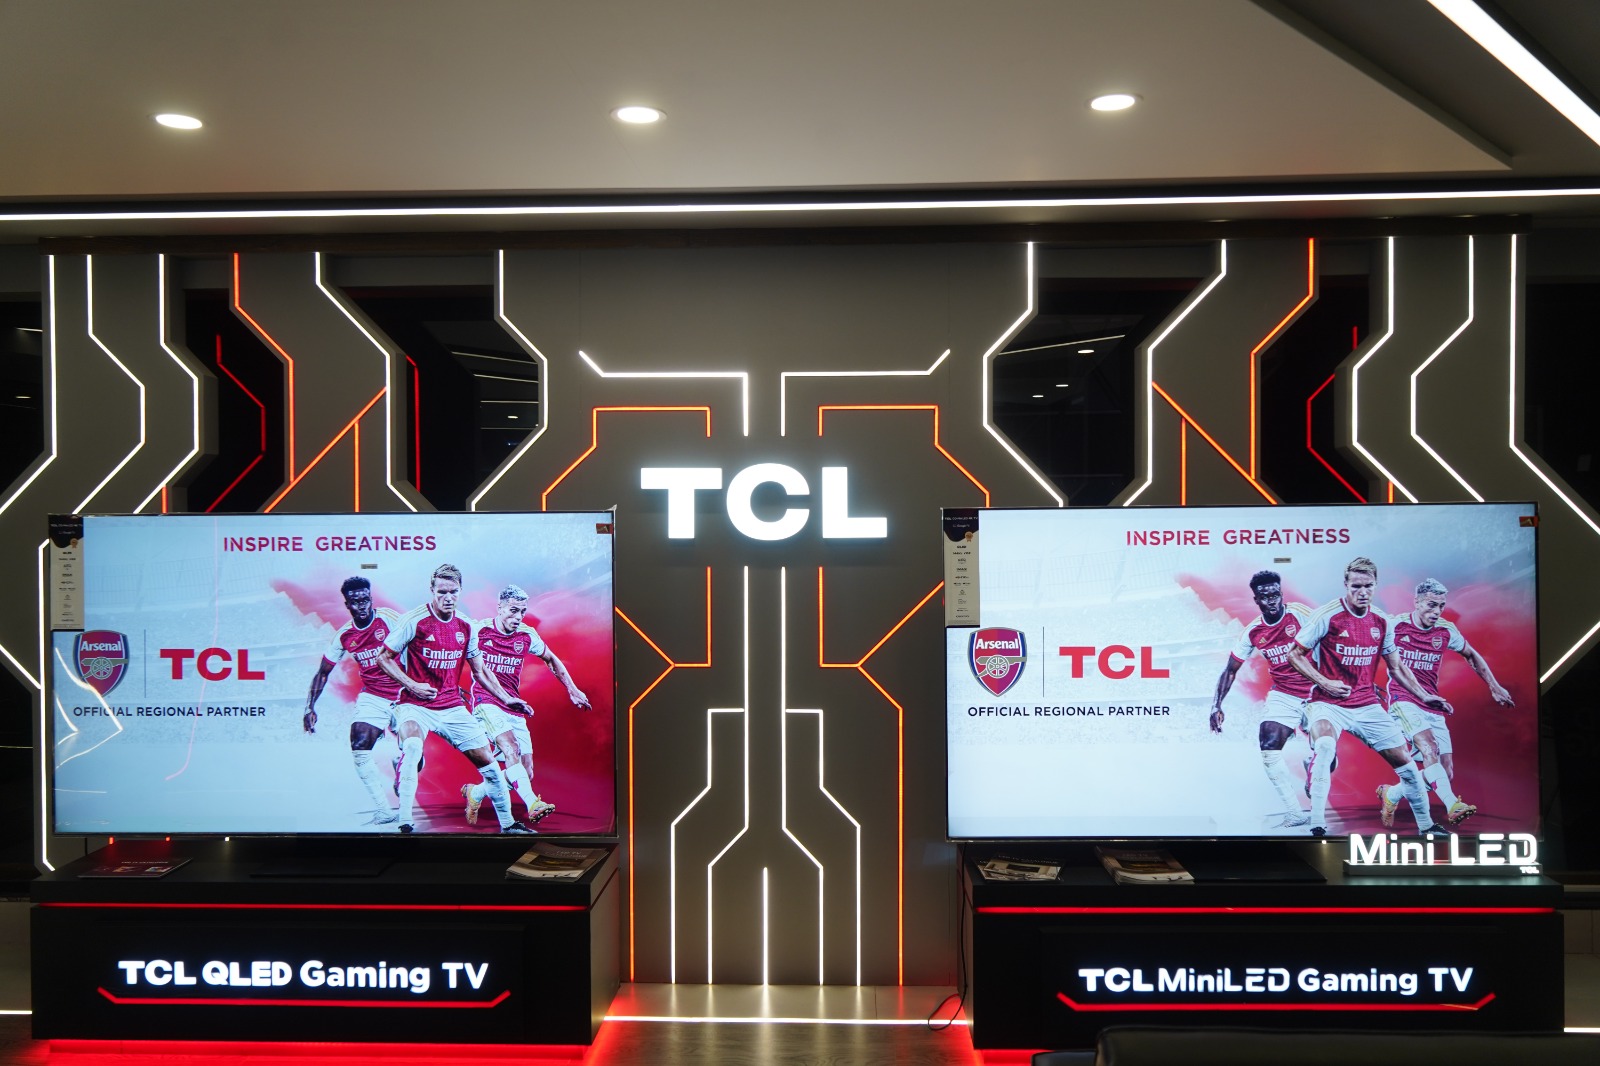 The TCL Experience Lounge screened the Arsenal vs. Manchester United match exclusively.